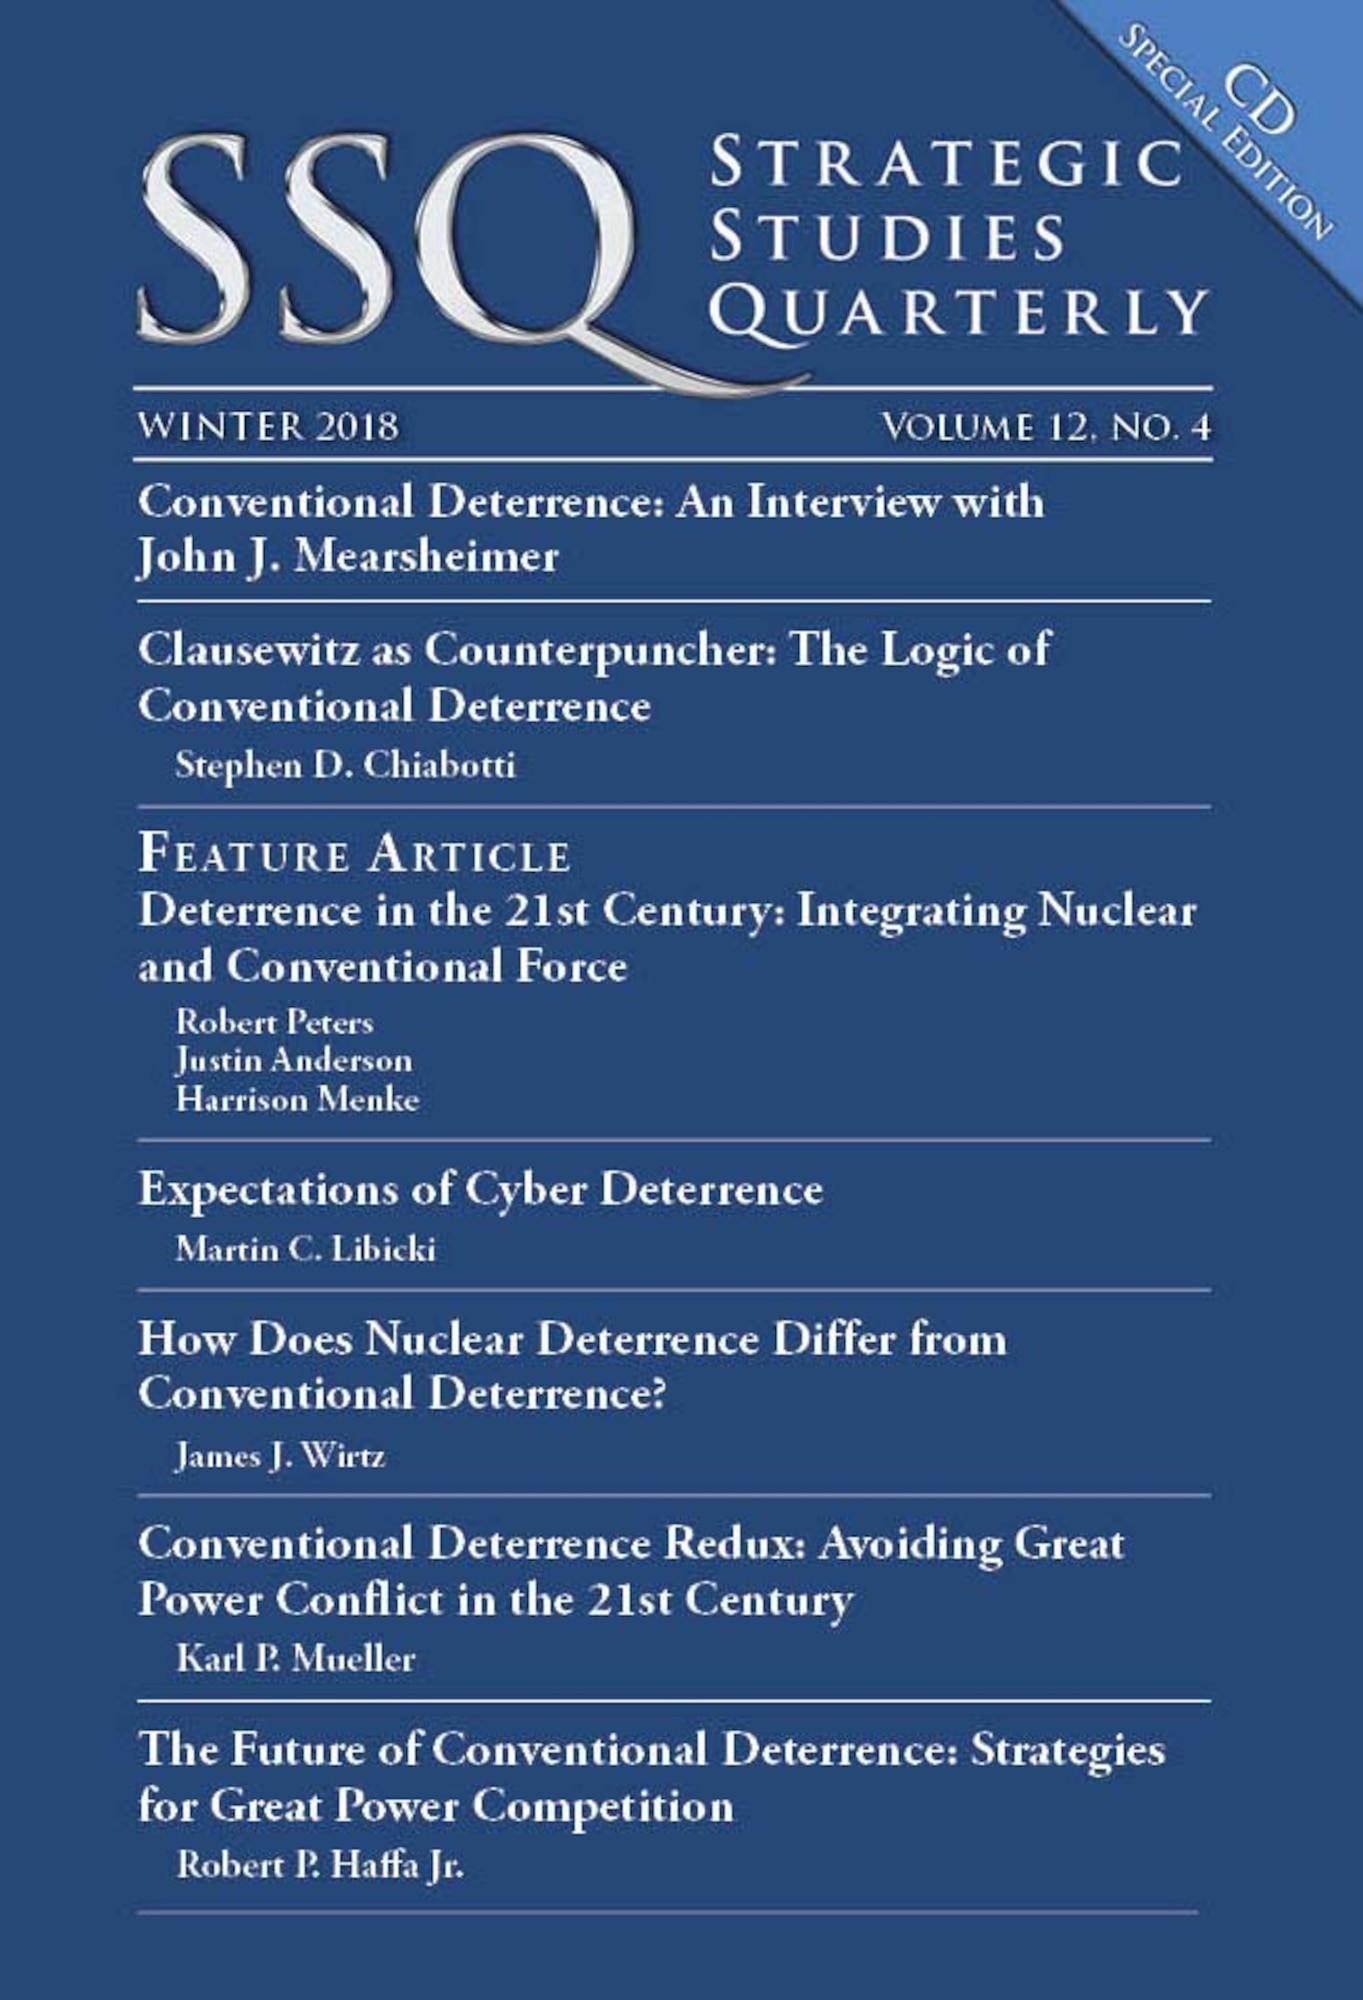 AU Press releases Conventional Deterrence Special Edition of SSQ